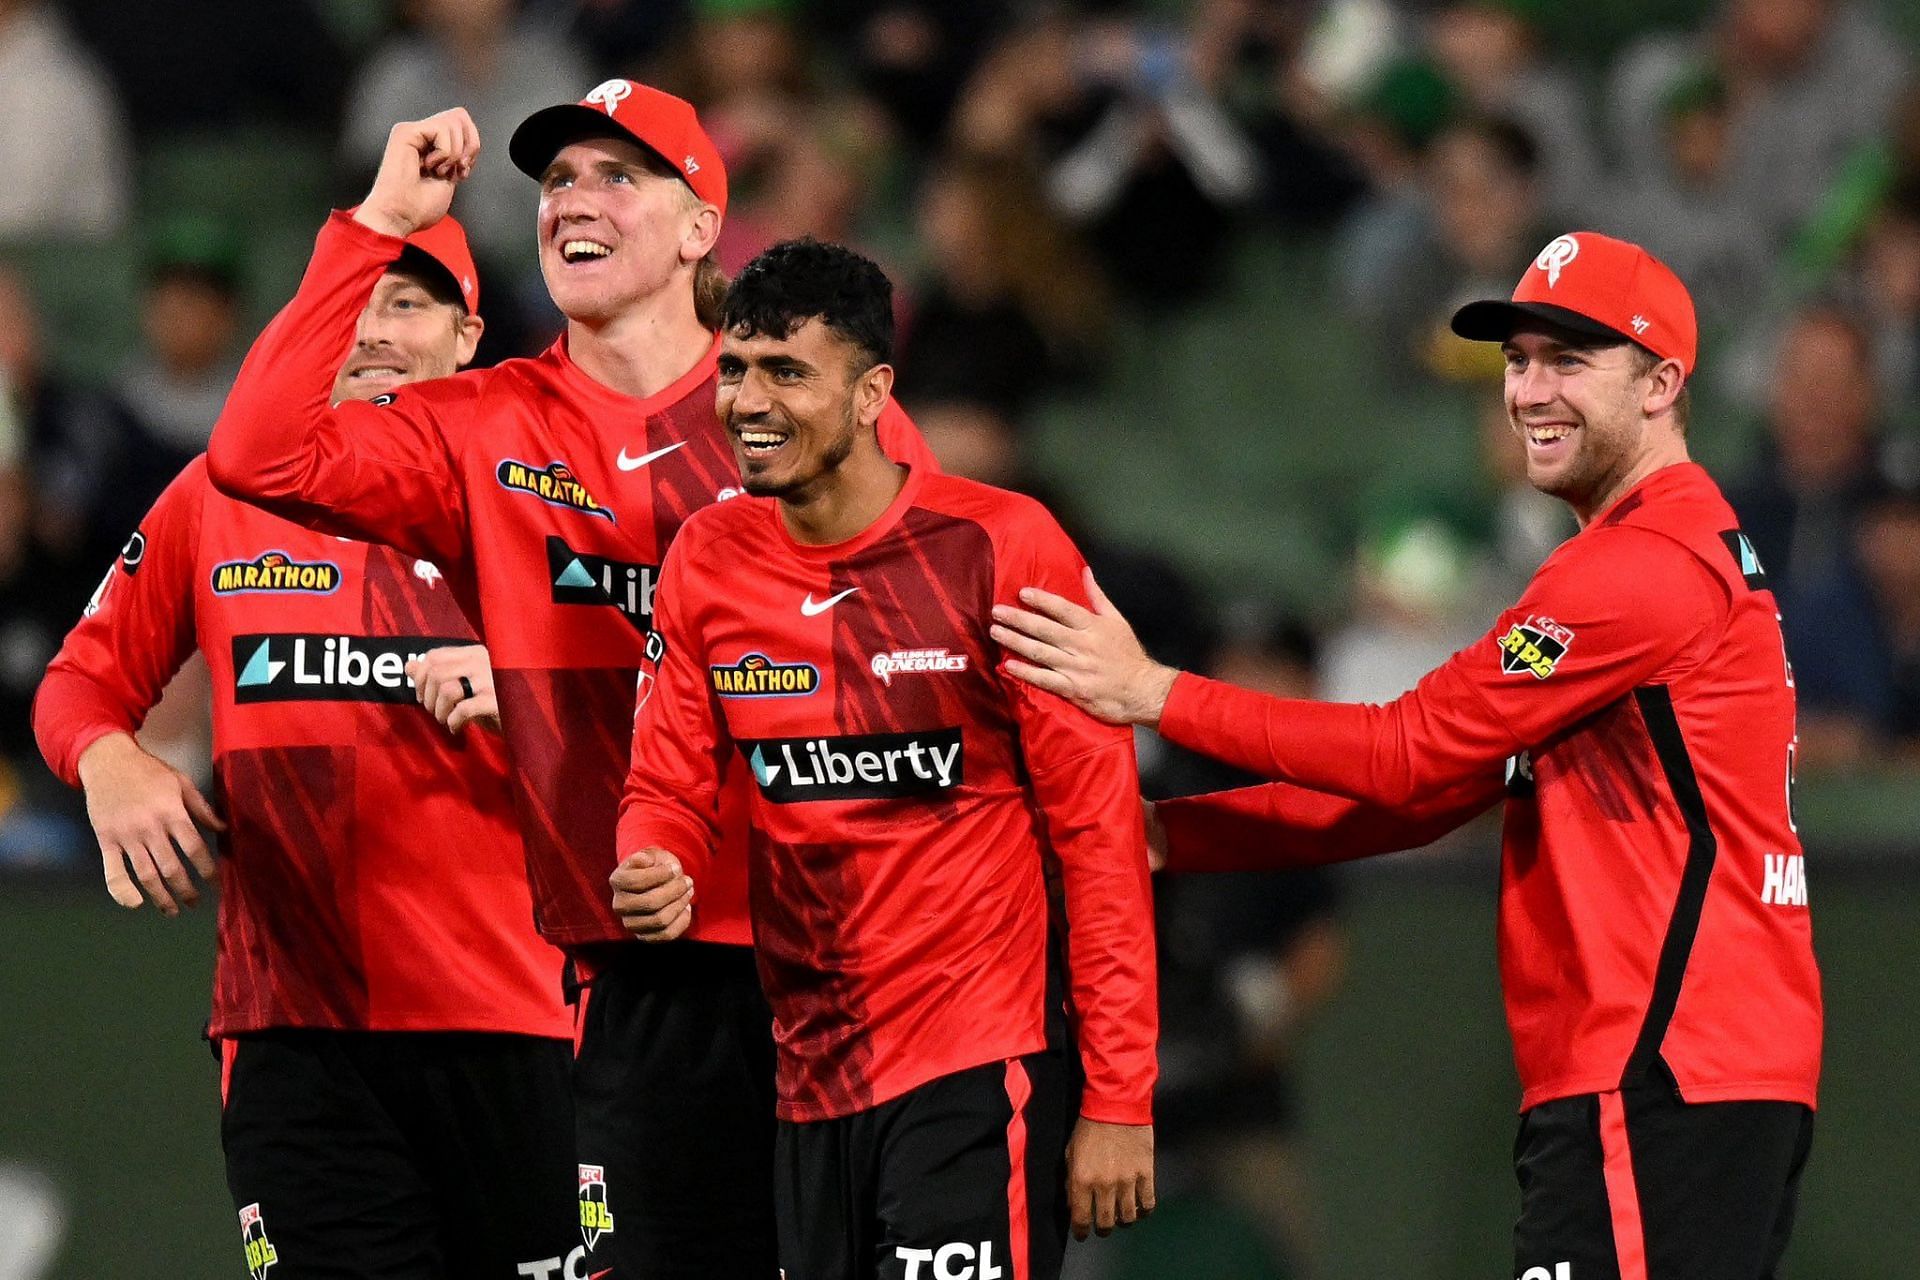 Melbourne Renegades won by 33 runs. (Credits: Twitter)